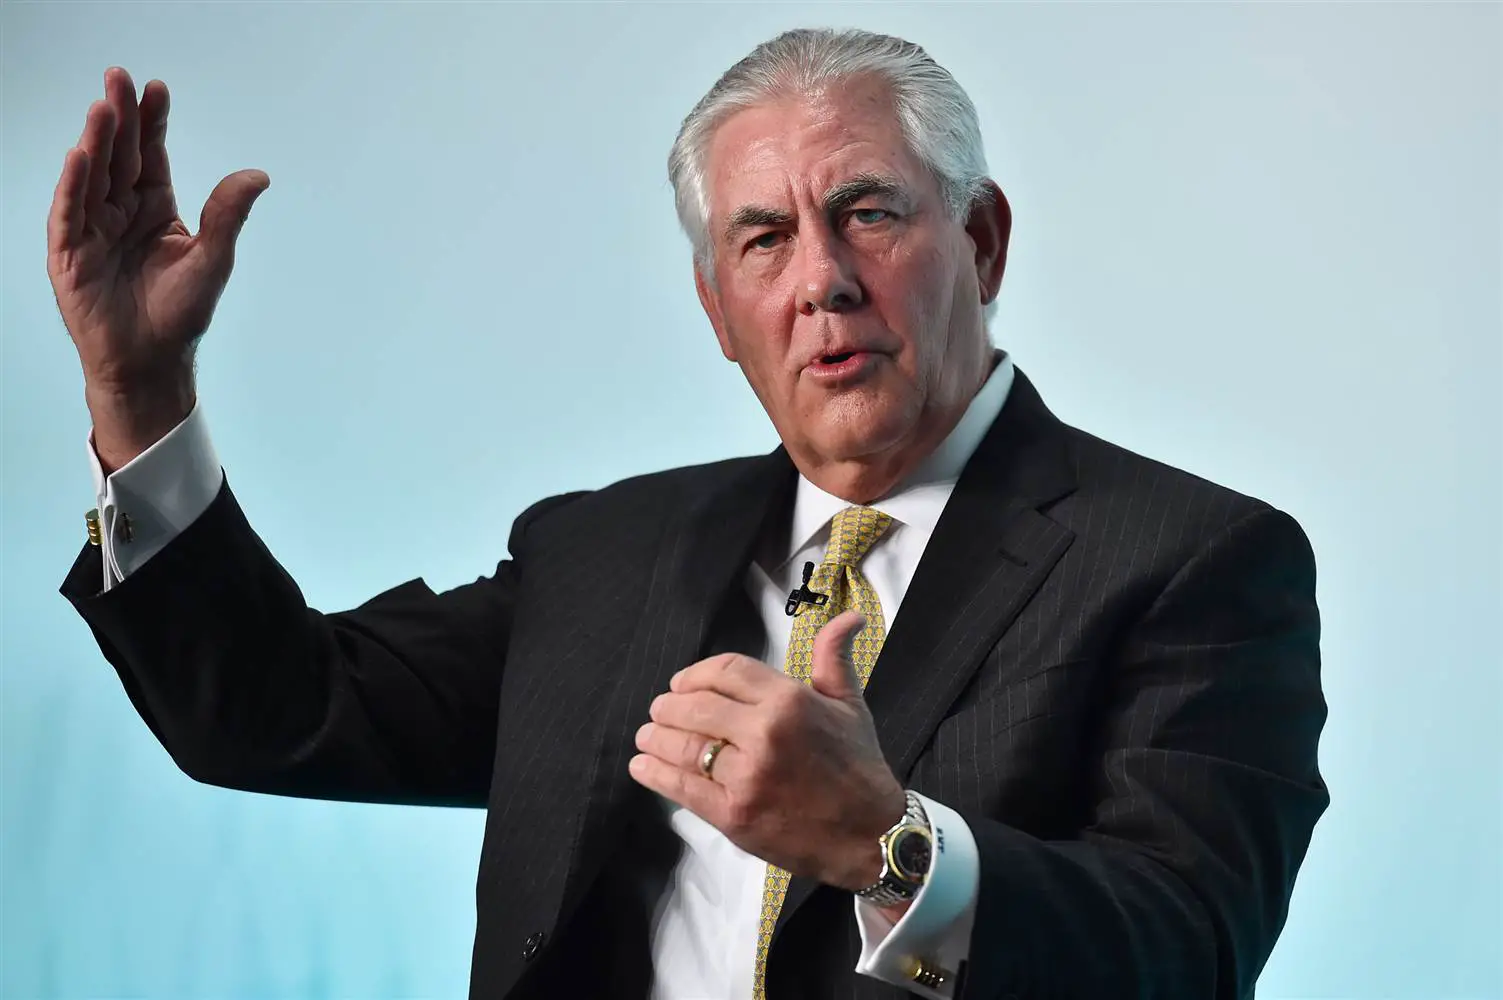 Chairman and CEO of US oil and gas corporation ExxonMobil, Rex Tillerson, speaks during the 2015 Oil and Money conference in central London on Oct. 7, 2015. Ben Stansall / AFP/Getty Images